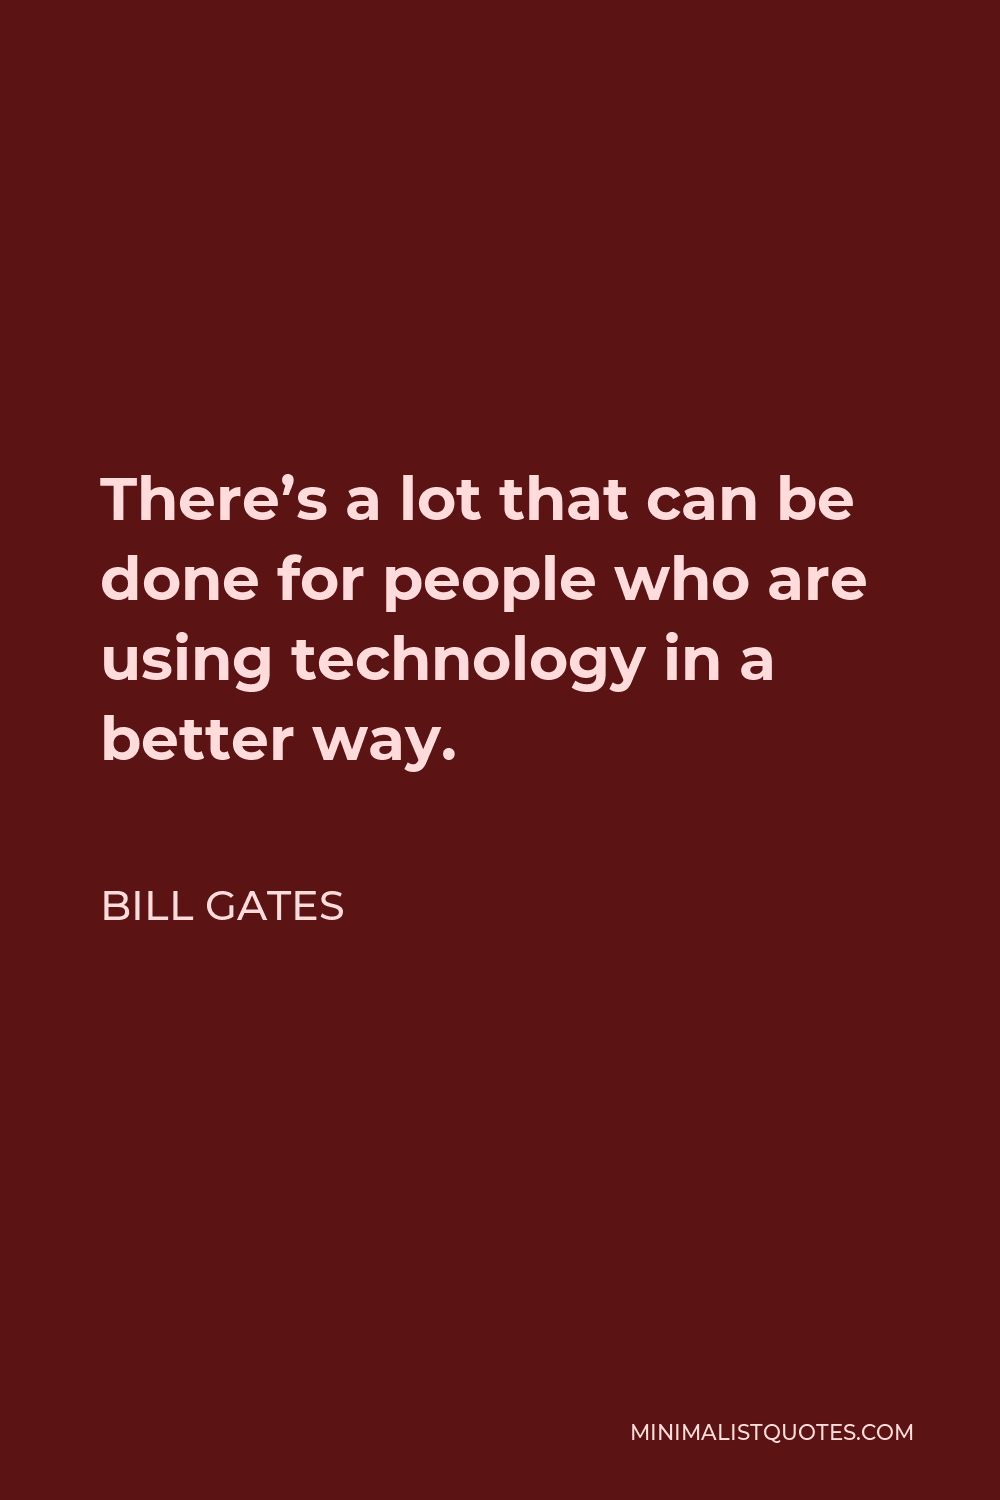 Bill Gates Quote - There’s a lot that can be done for people who are using technology in a better way.